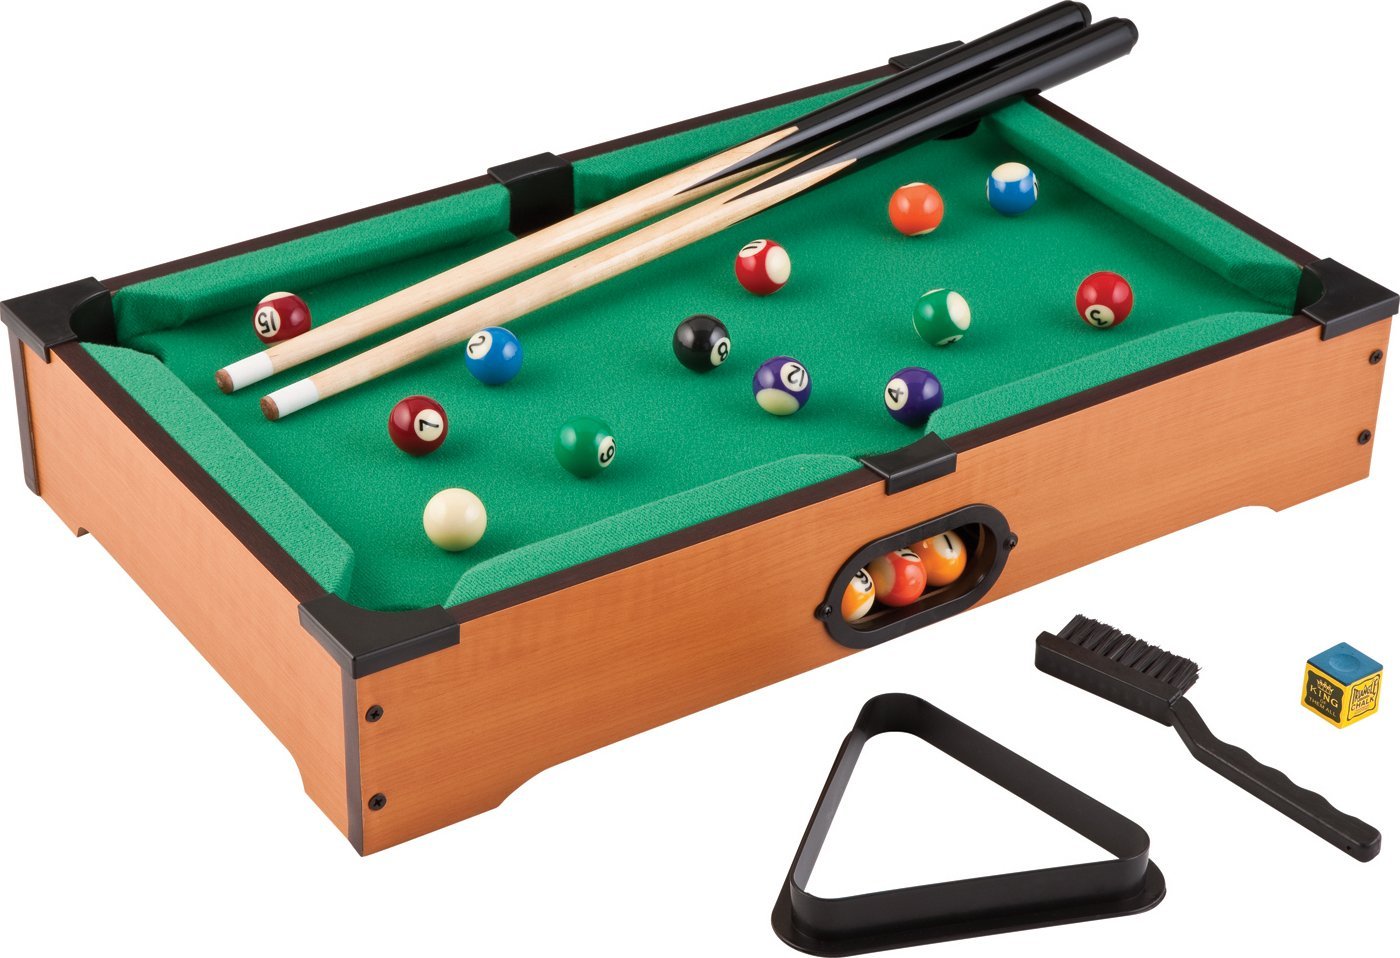 Know more about the billiards game